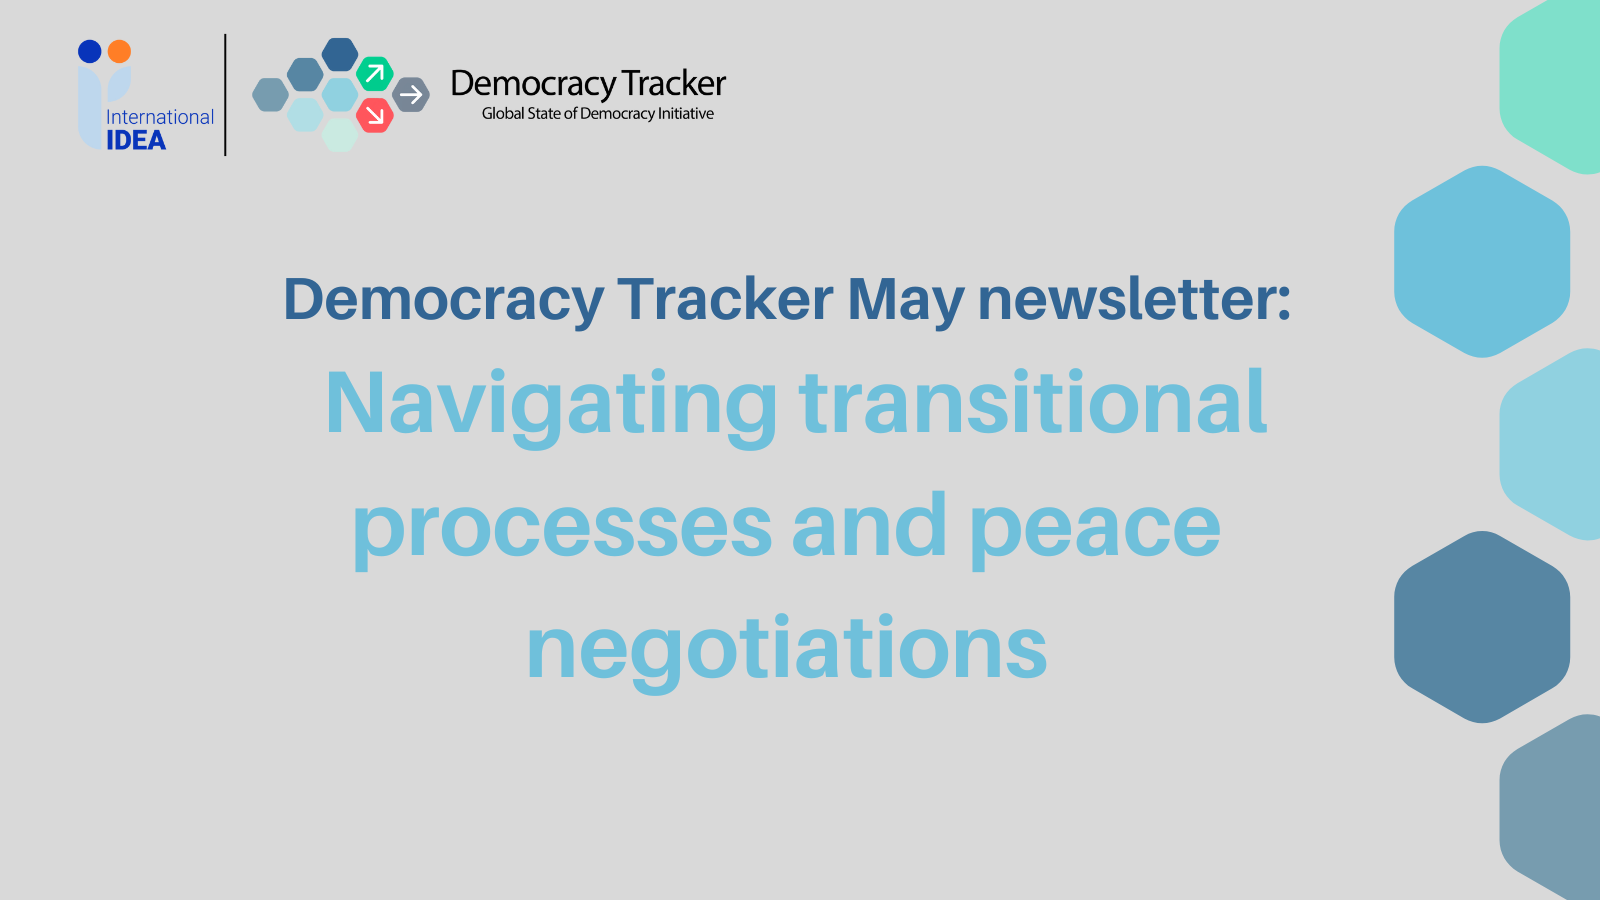 Navigating transitional processes and peace negotiations